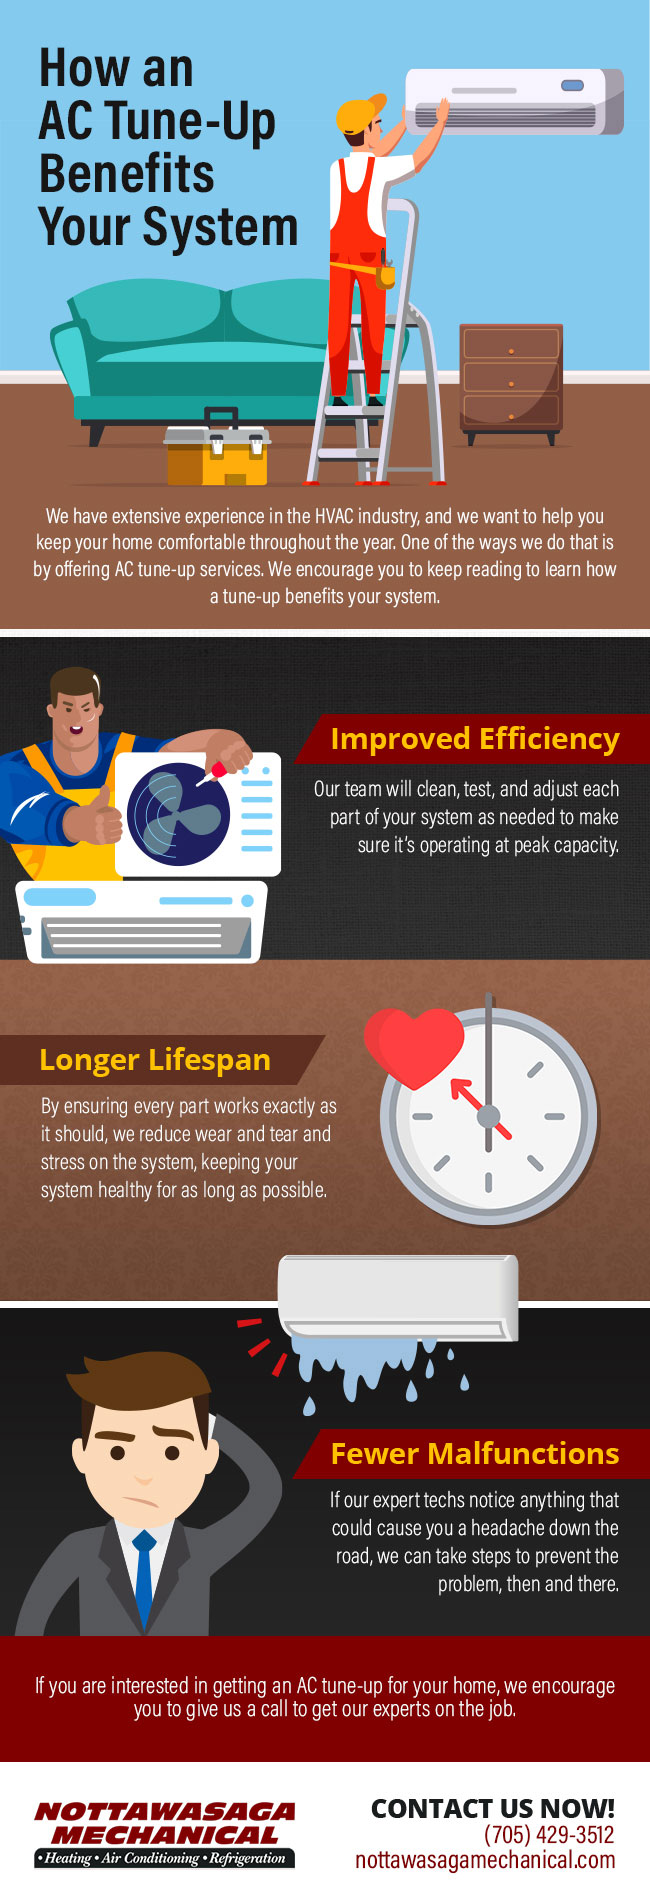 How an AC Tune-Up Benefits Your System